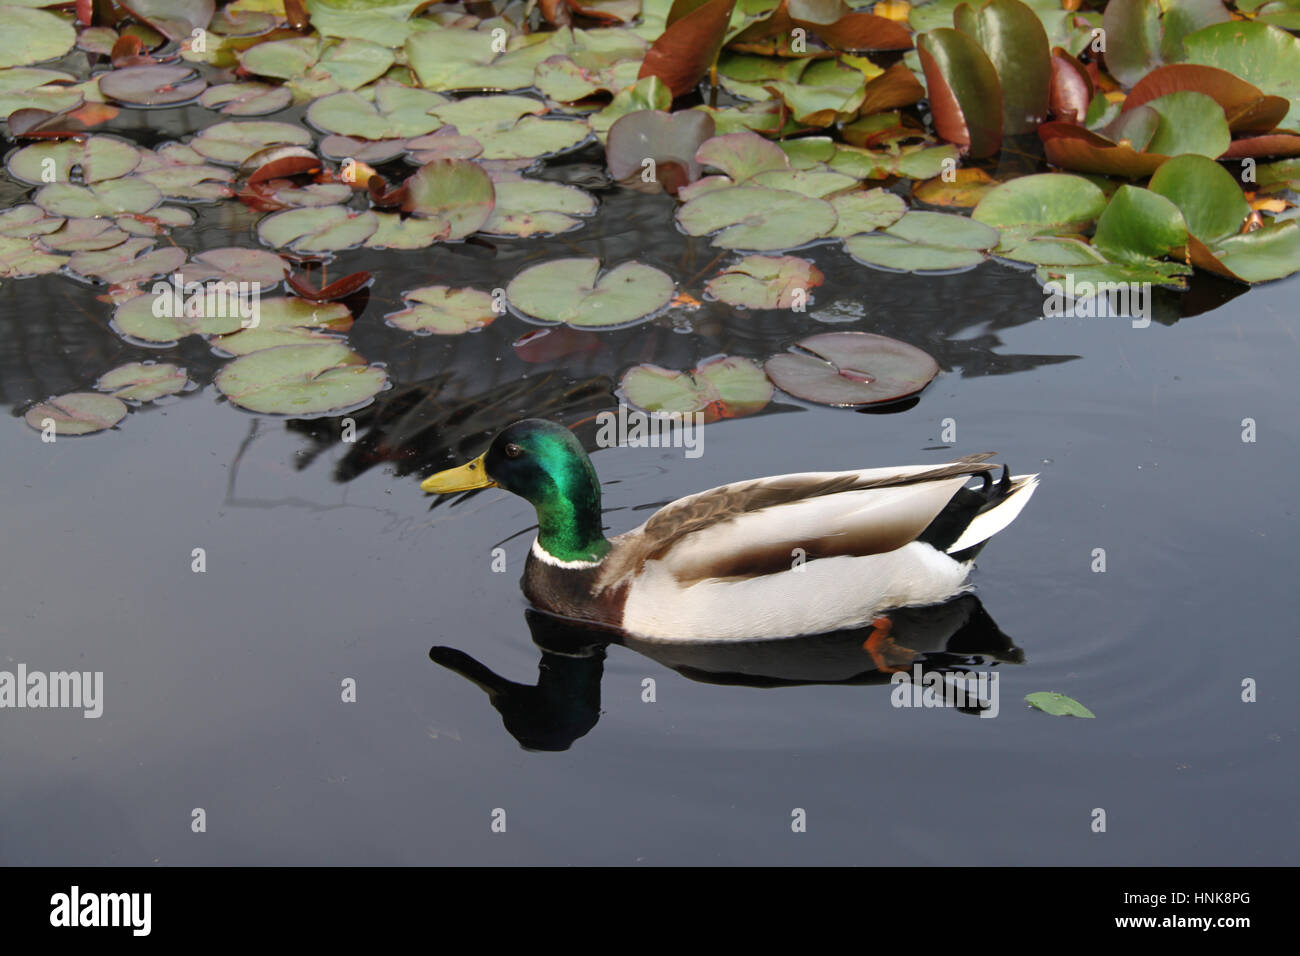 Mallard duck (male) swimming in water lily pond with leaves - Botanical garden Stock Photo